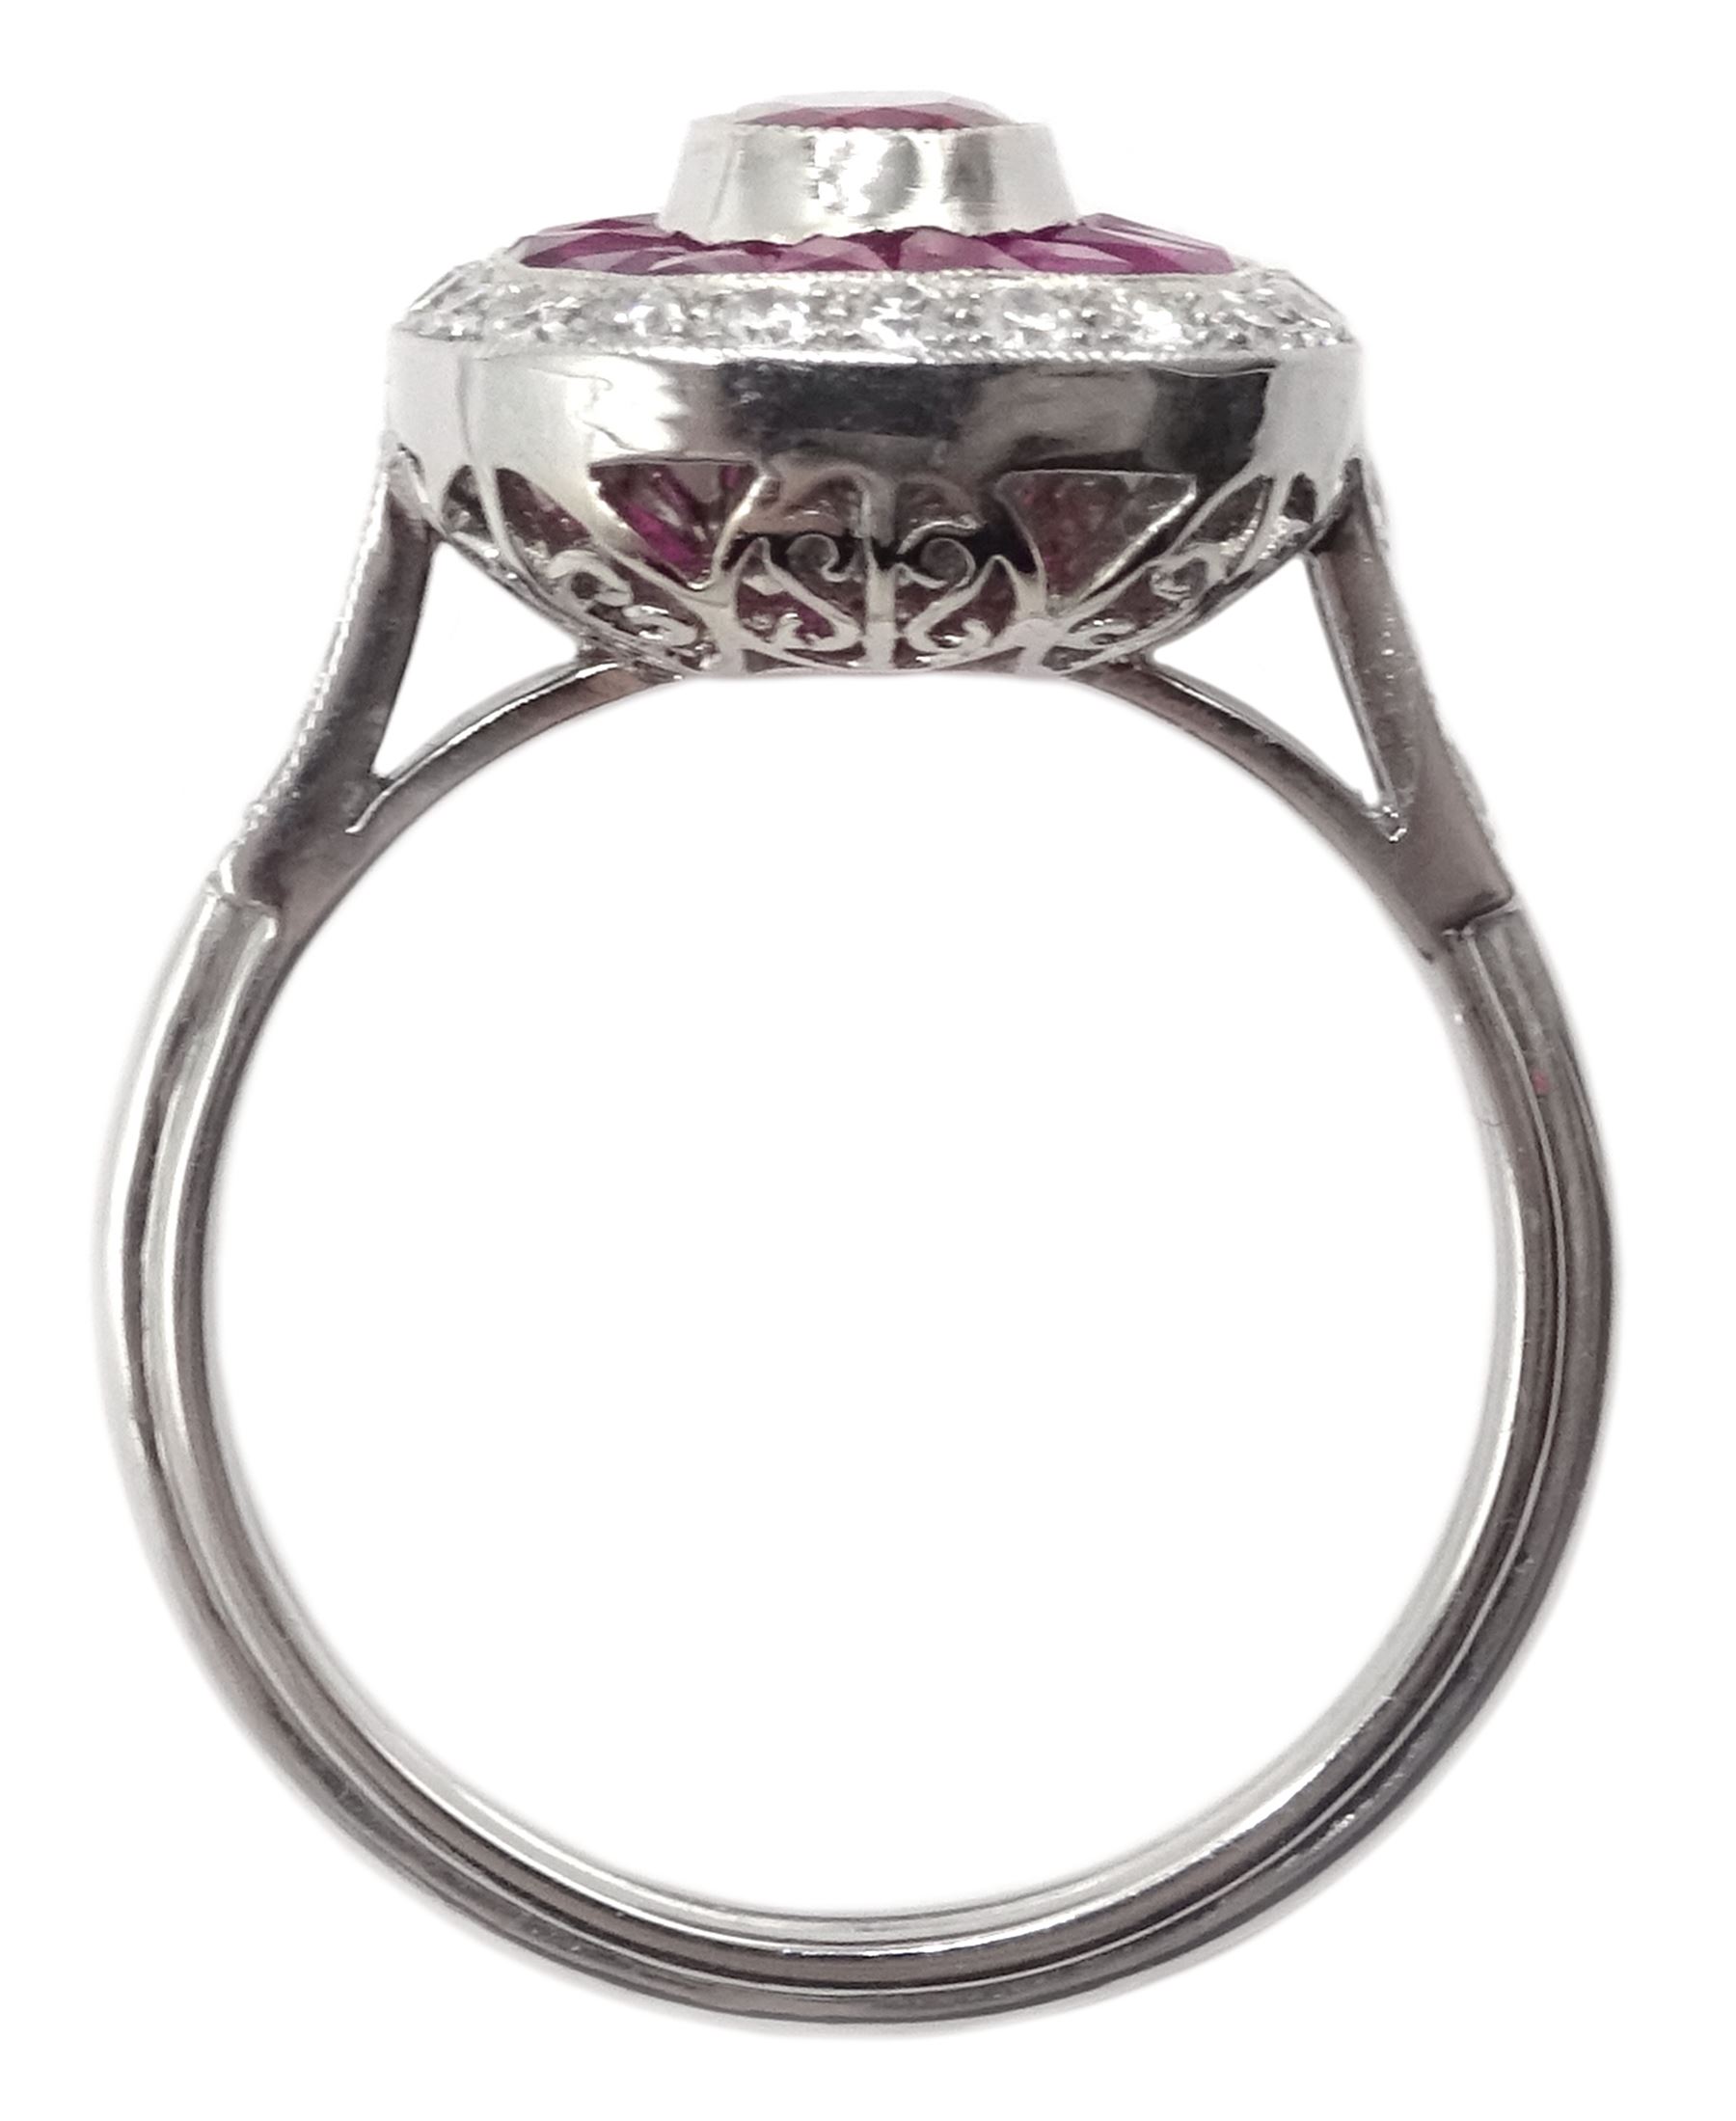 Platinum ring set with central oval ruby - Image 3 of 4